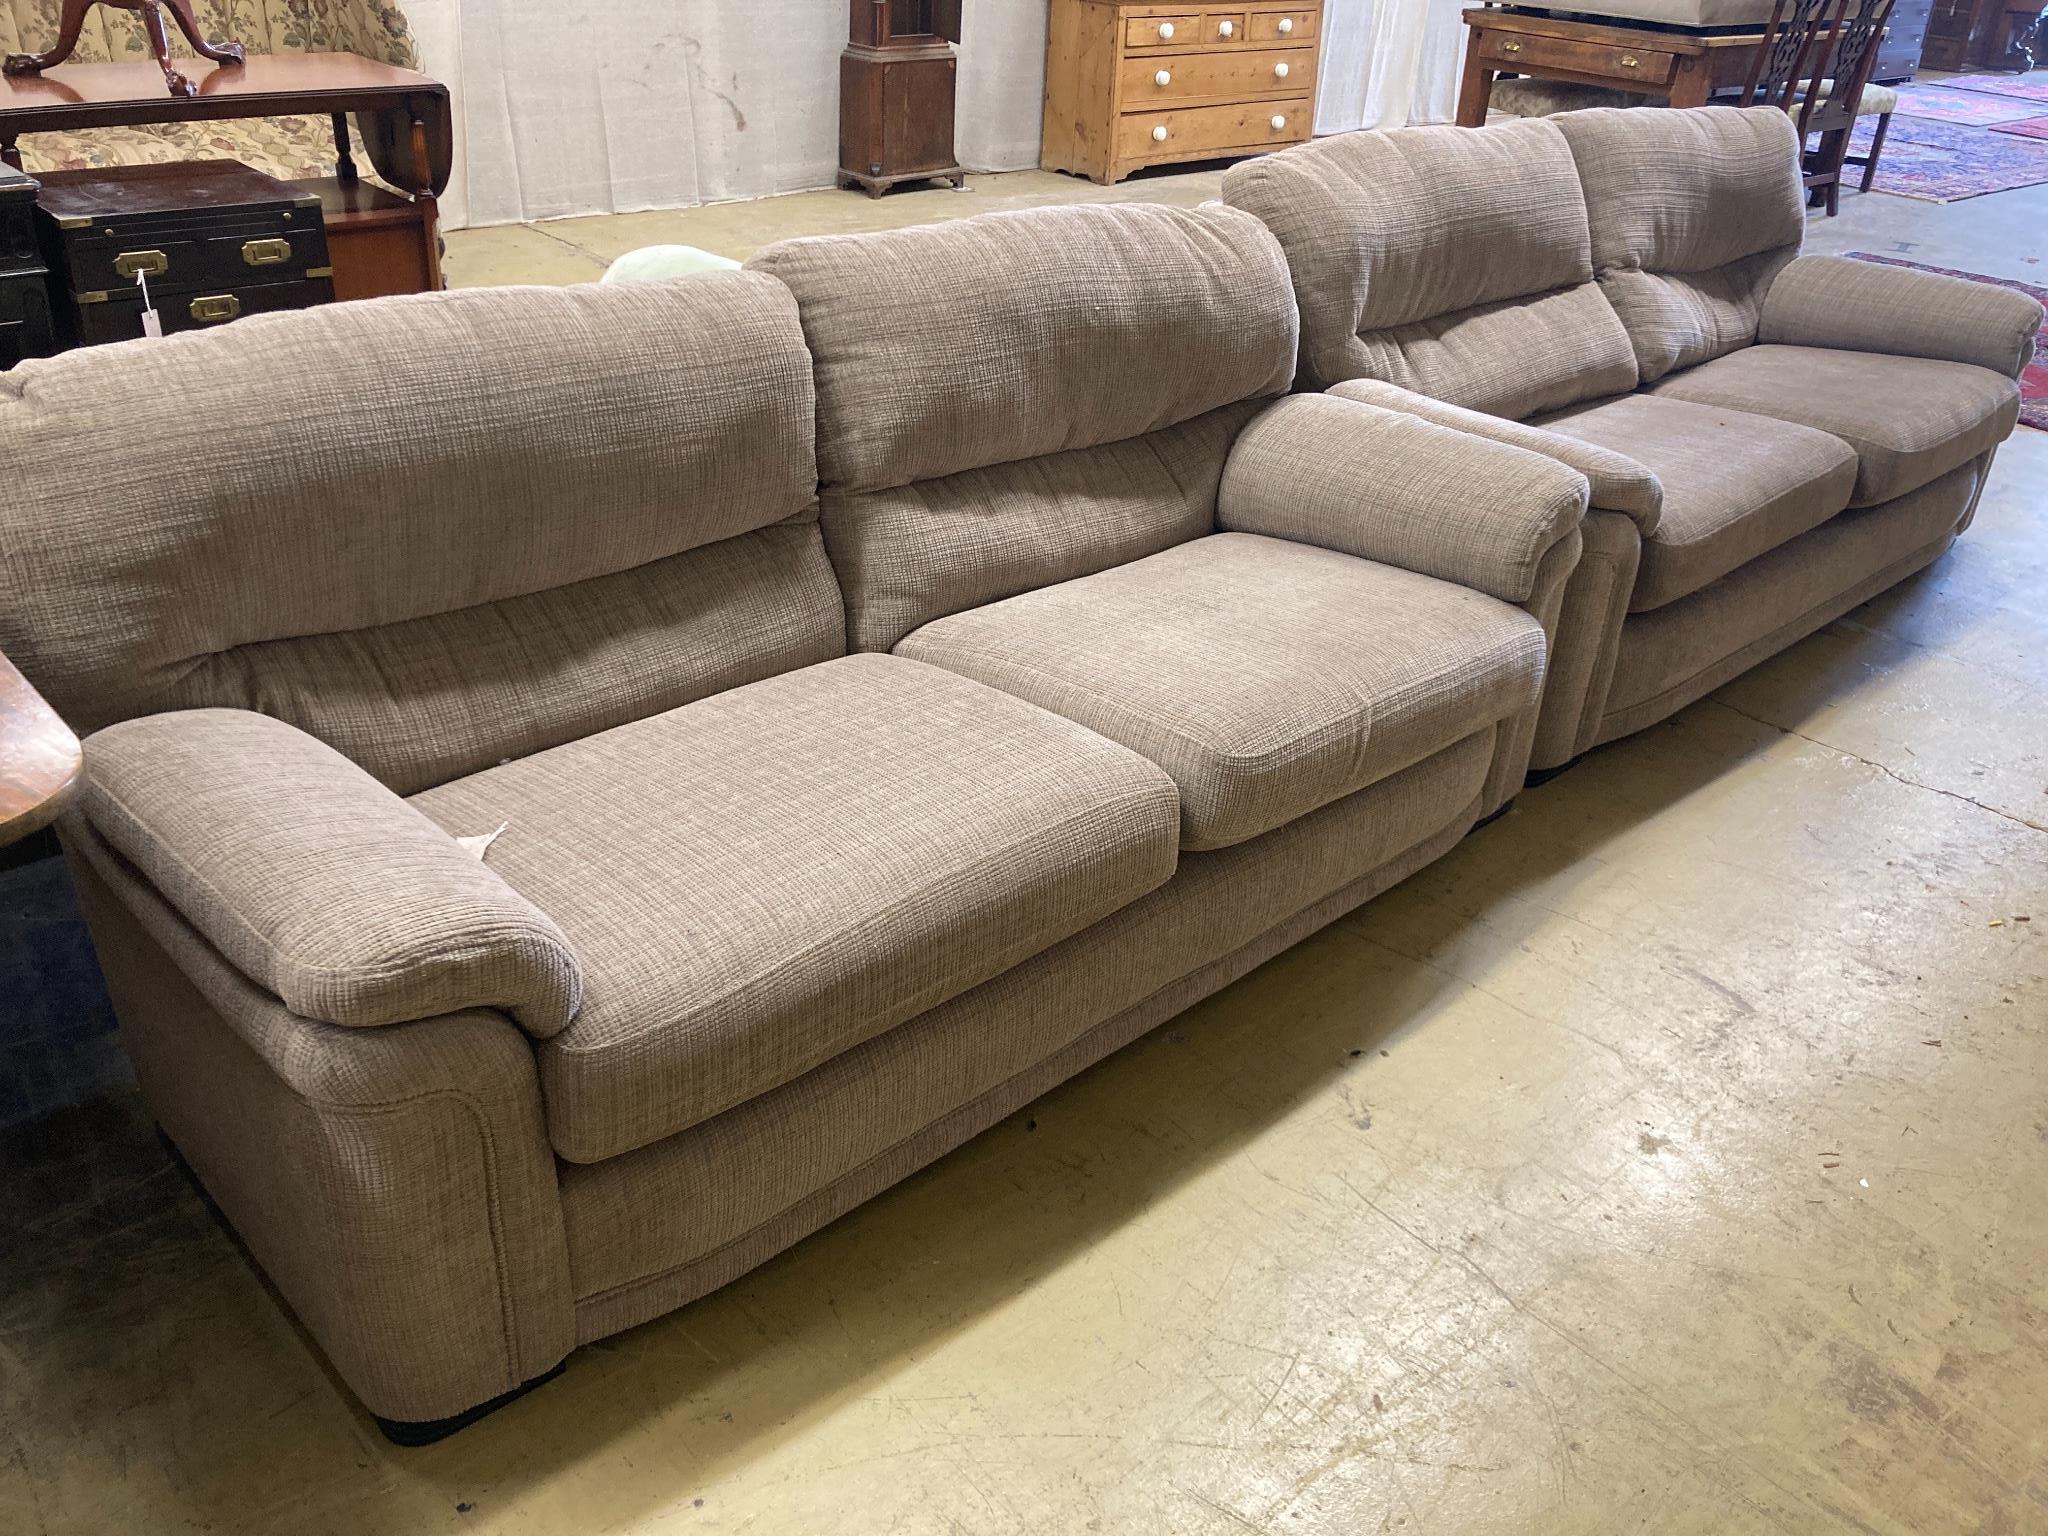 Two matching contemporary four-seater settees with grey/brown upholstery, length 200cm, depth 100cm, height 88cm